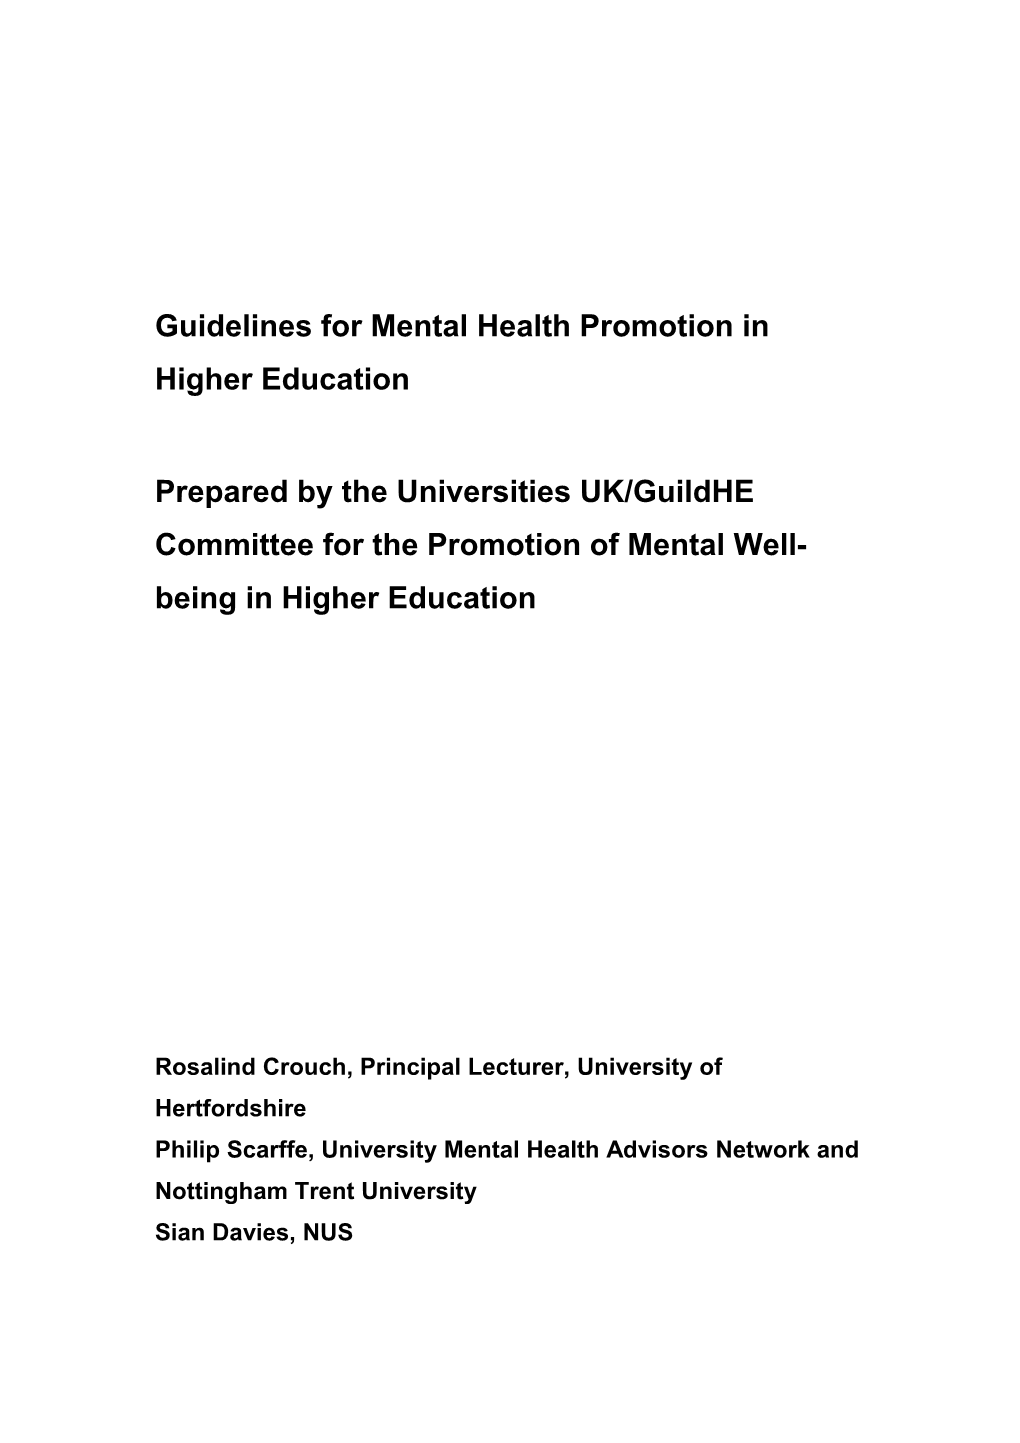 Final Guidelines for Mental Health Promotion in Higher Education